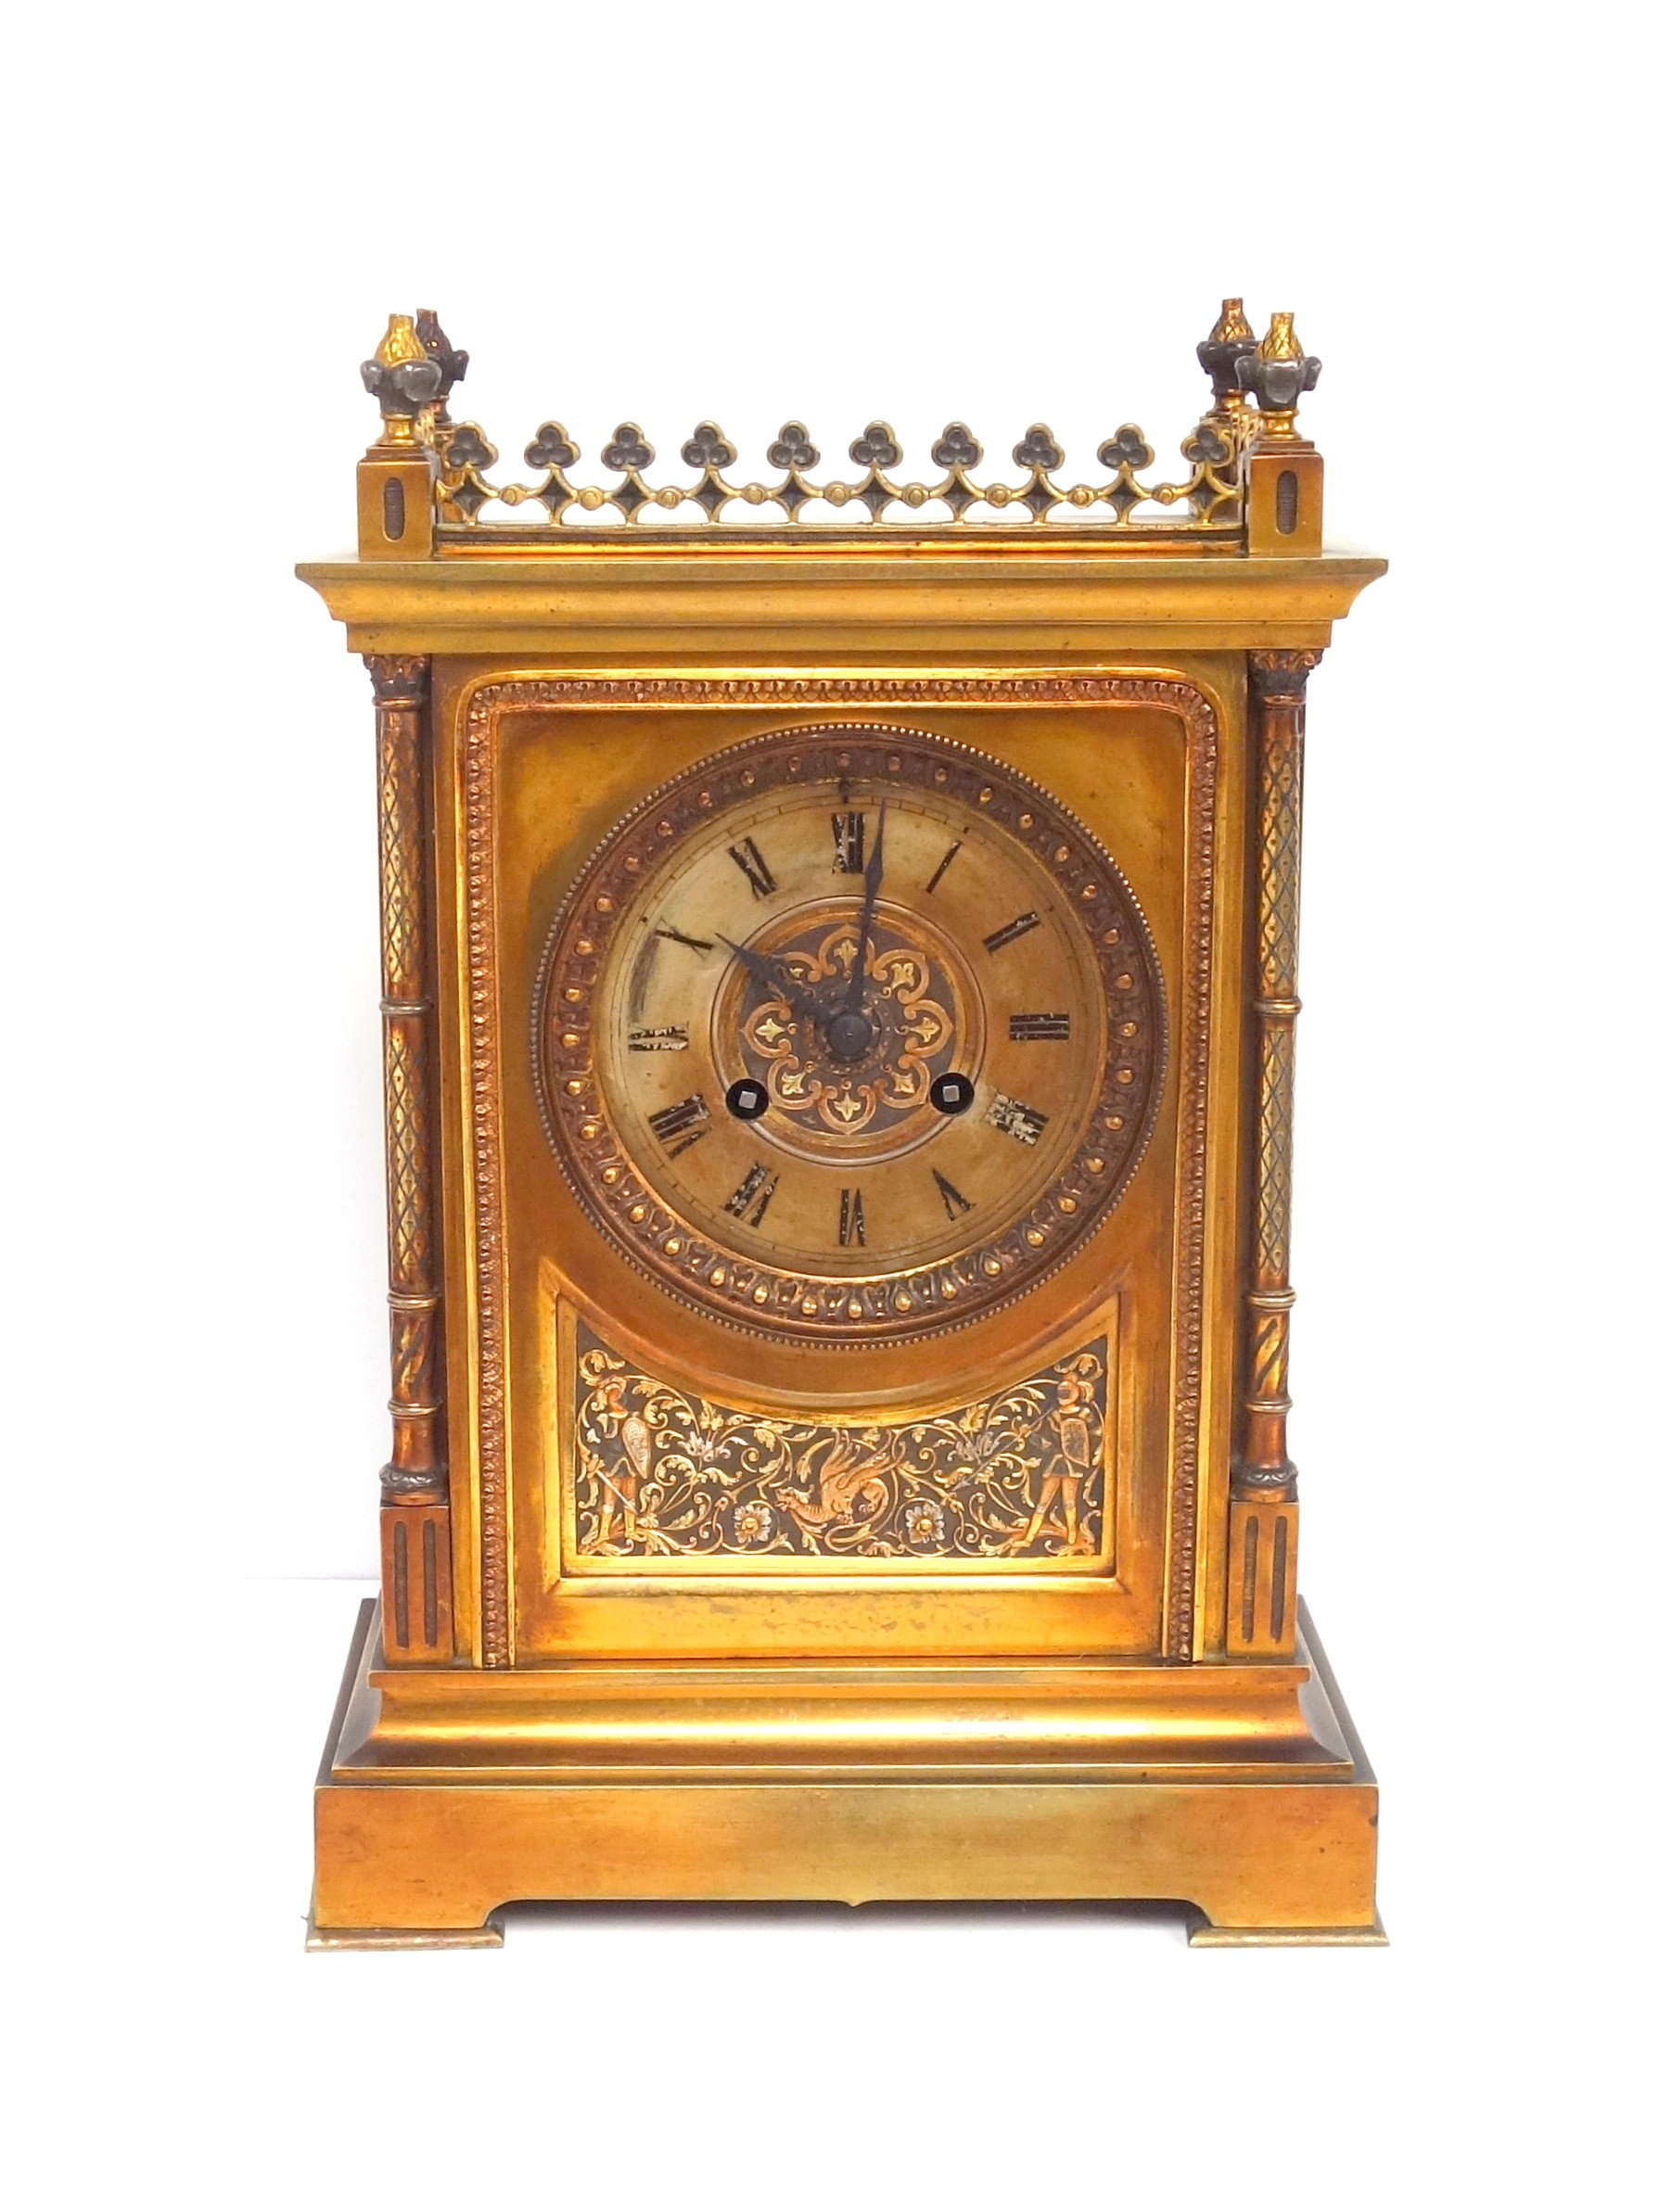 Late 19th Century fine French mantel clock with a gilt circular dial with black Roman numerals - Image 2 of 8